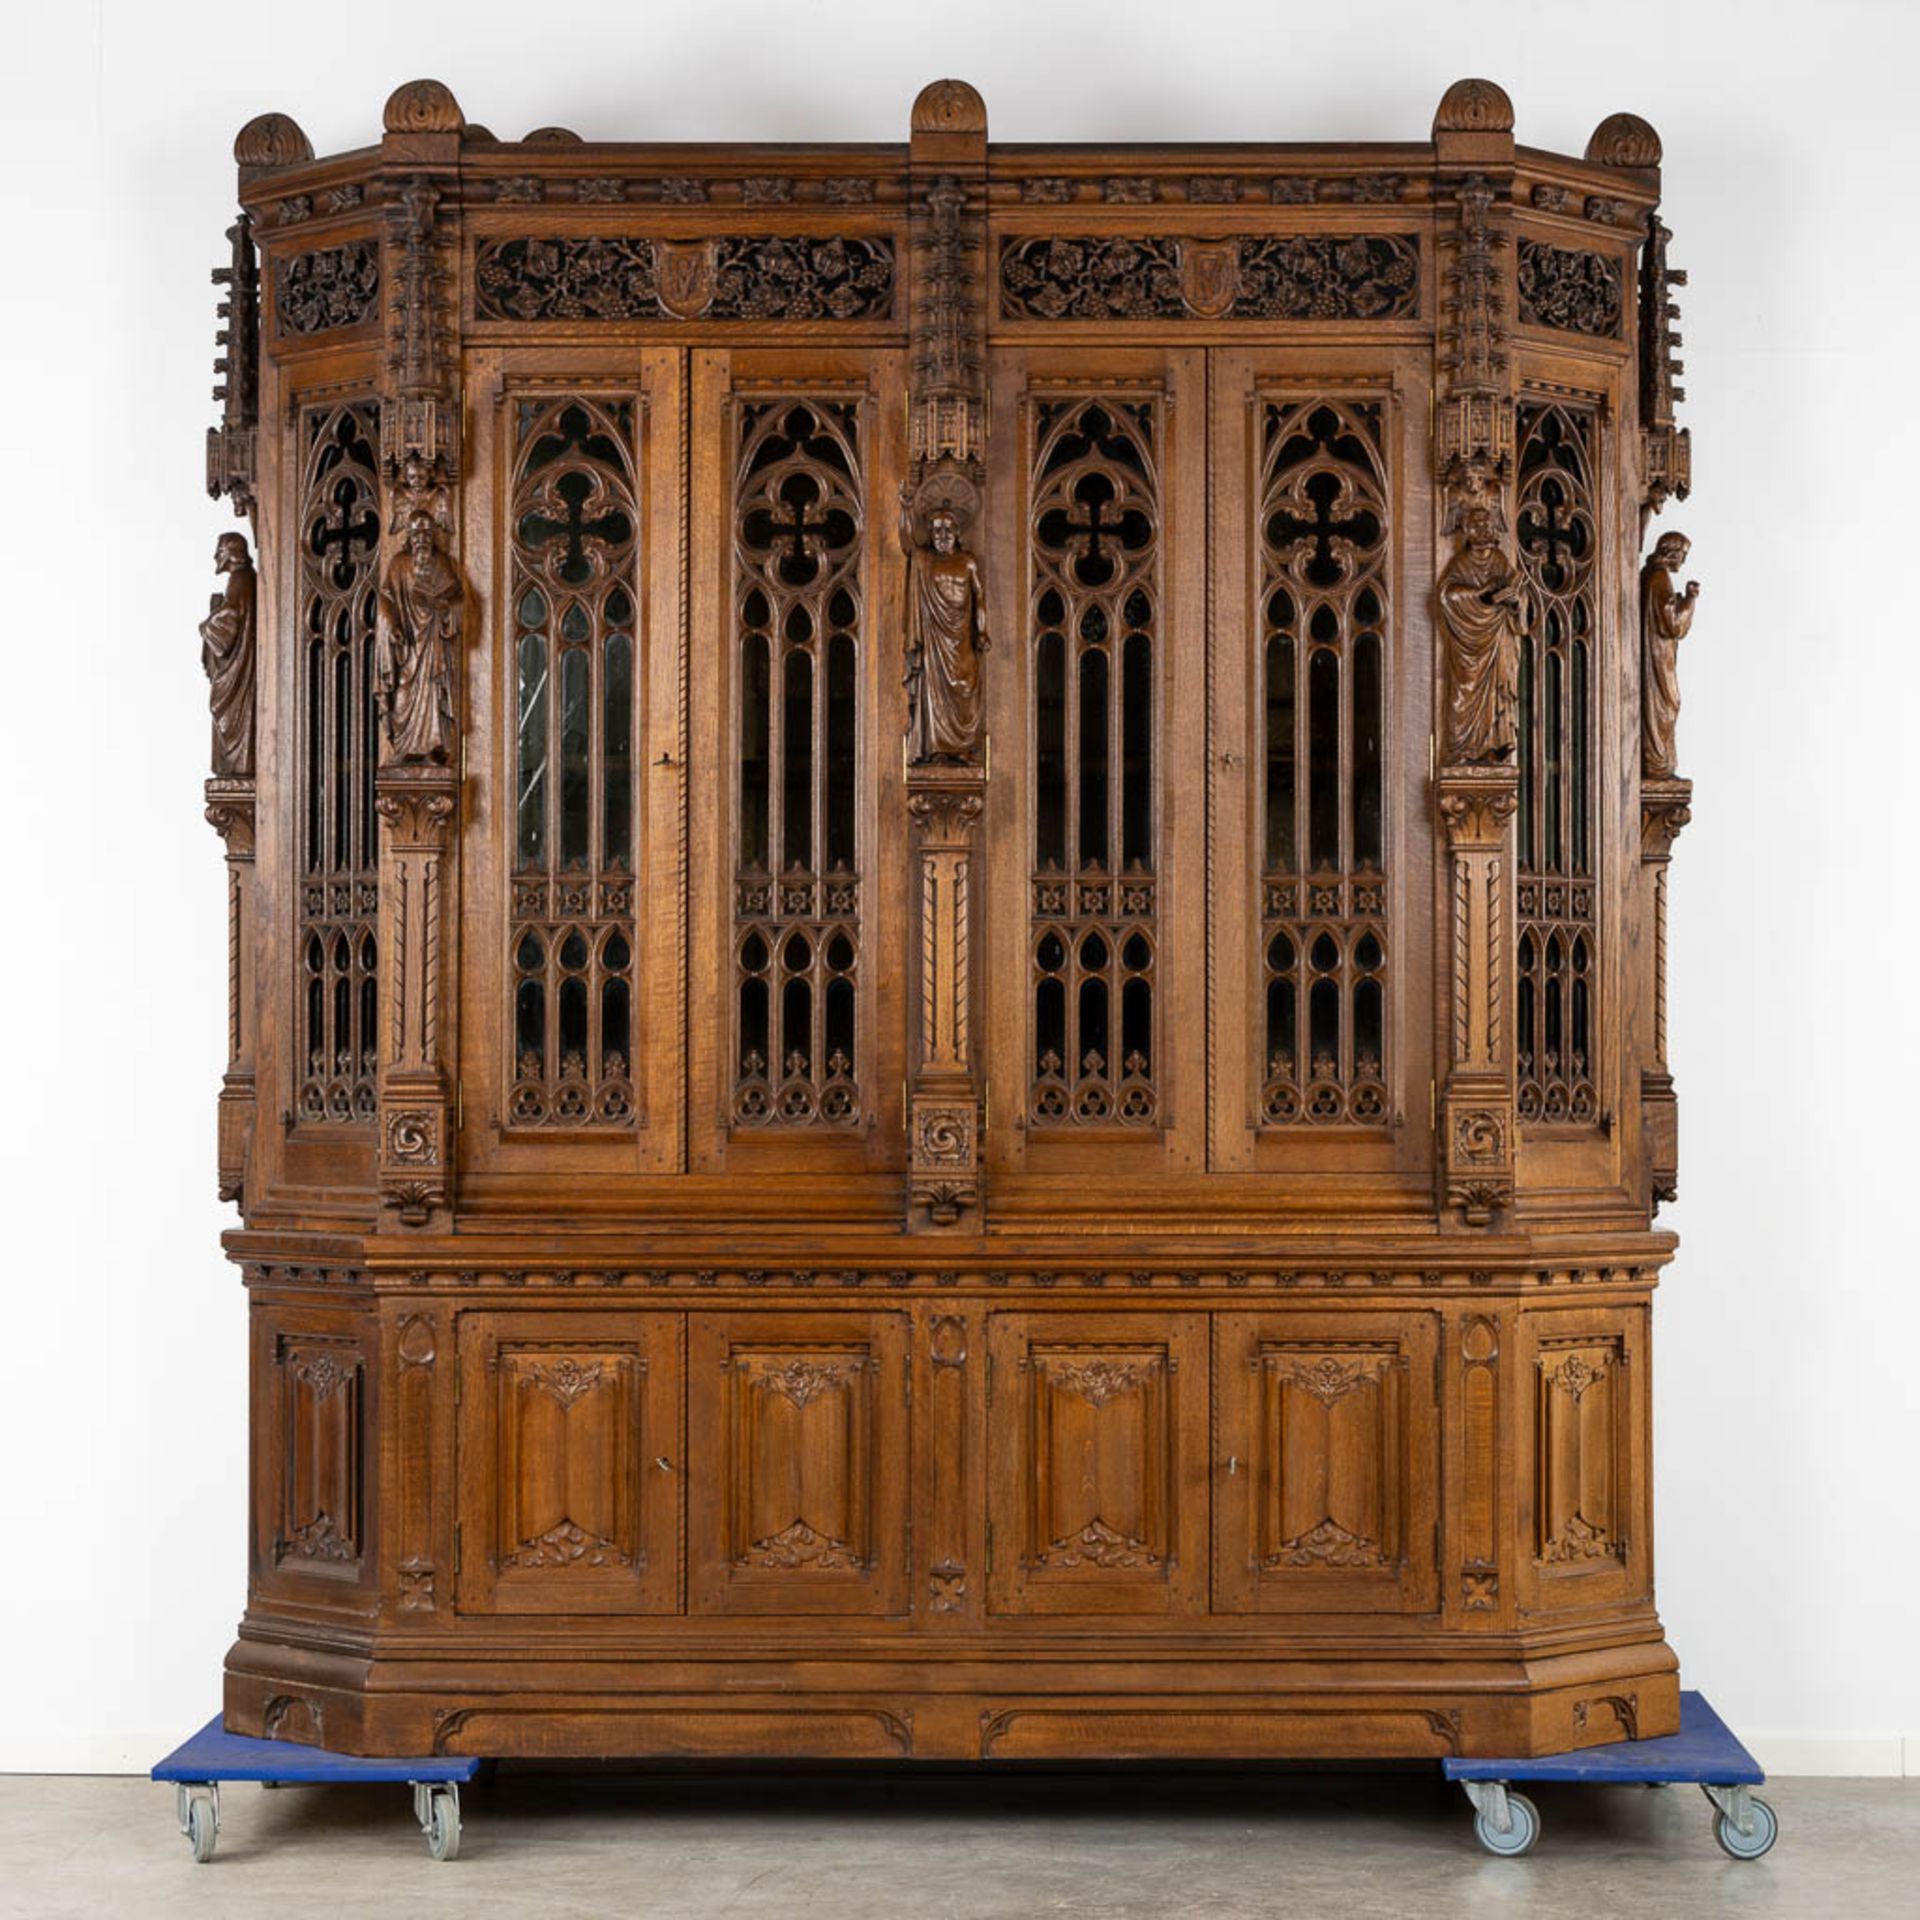 An exceptionally sculptured Gothic Revival library. Circa 1900. (L:62 x W:236 x H:264 cm)